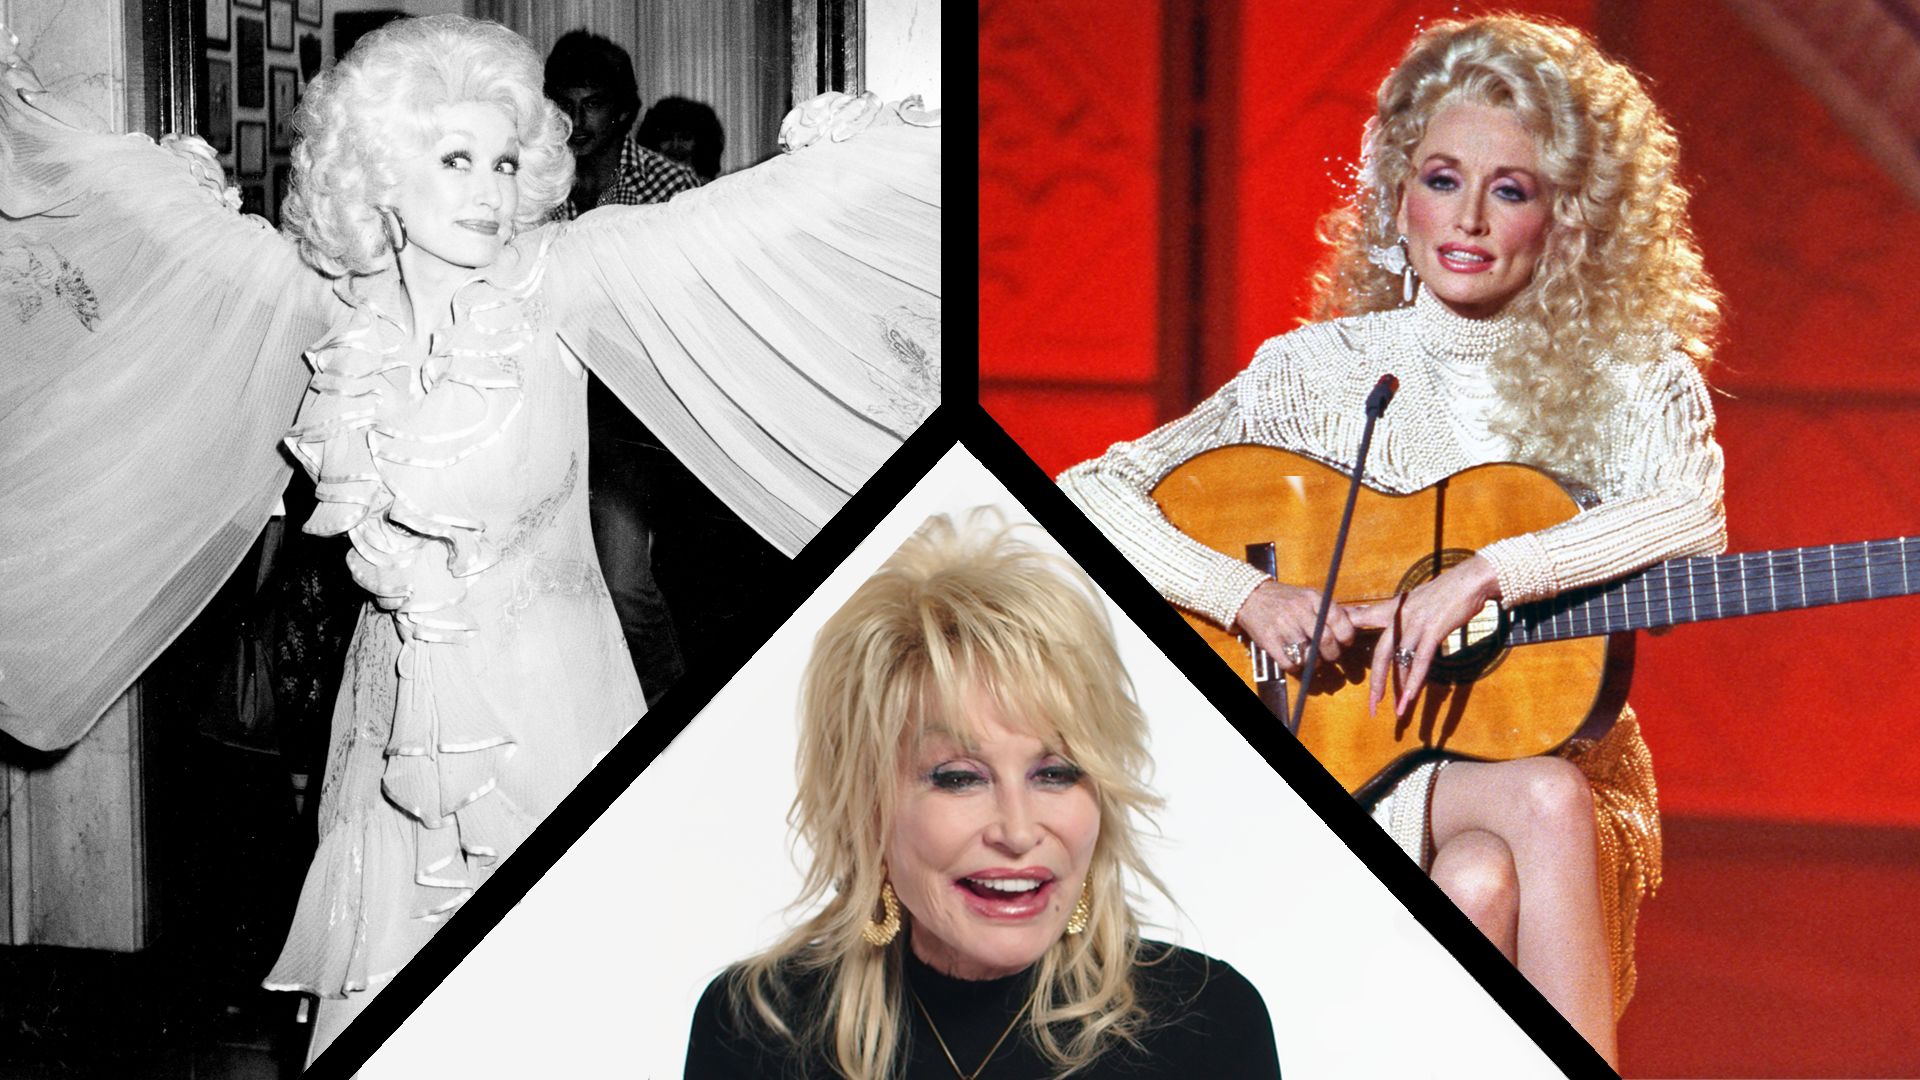 Dolly Parton says she'd 'rather be' in her 70s than be young again